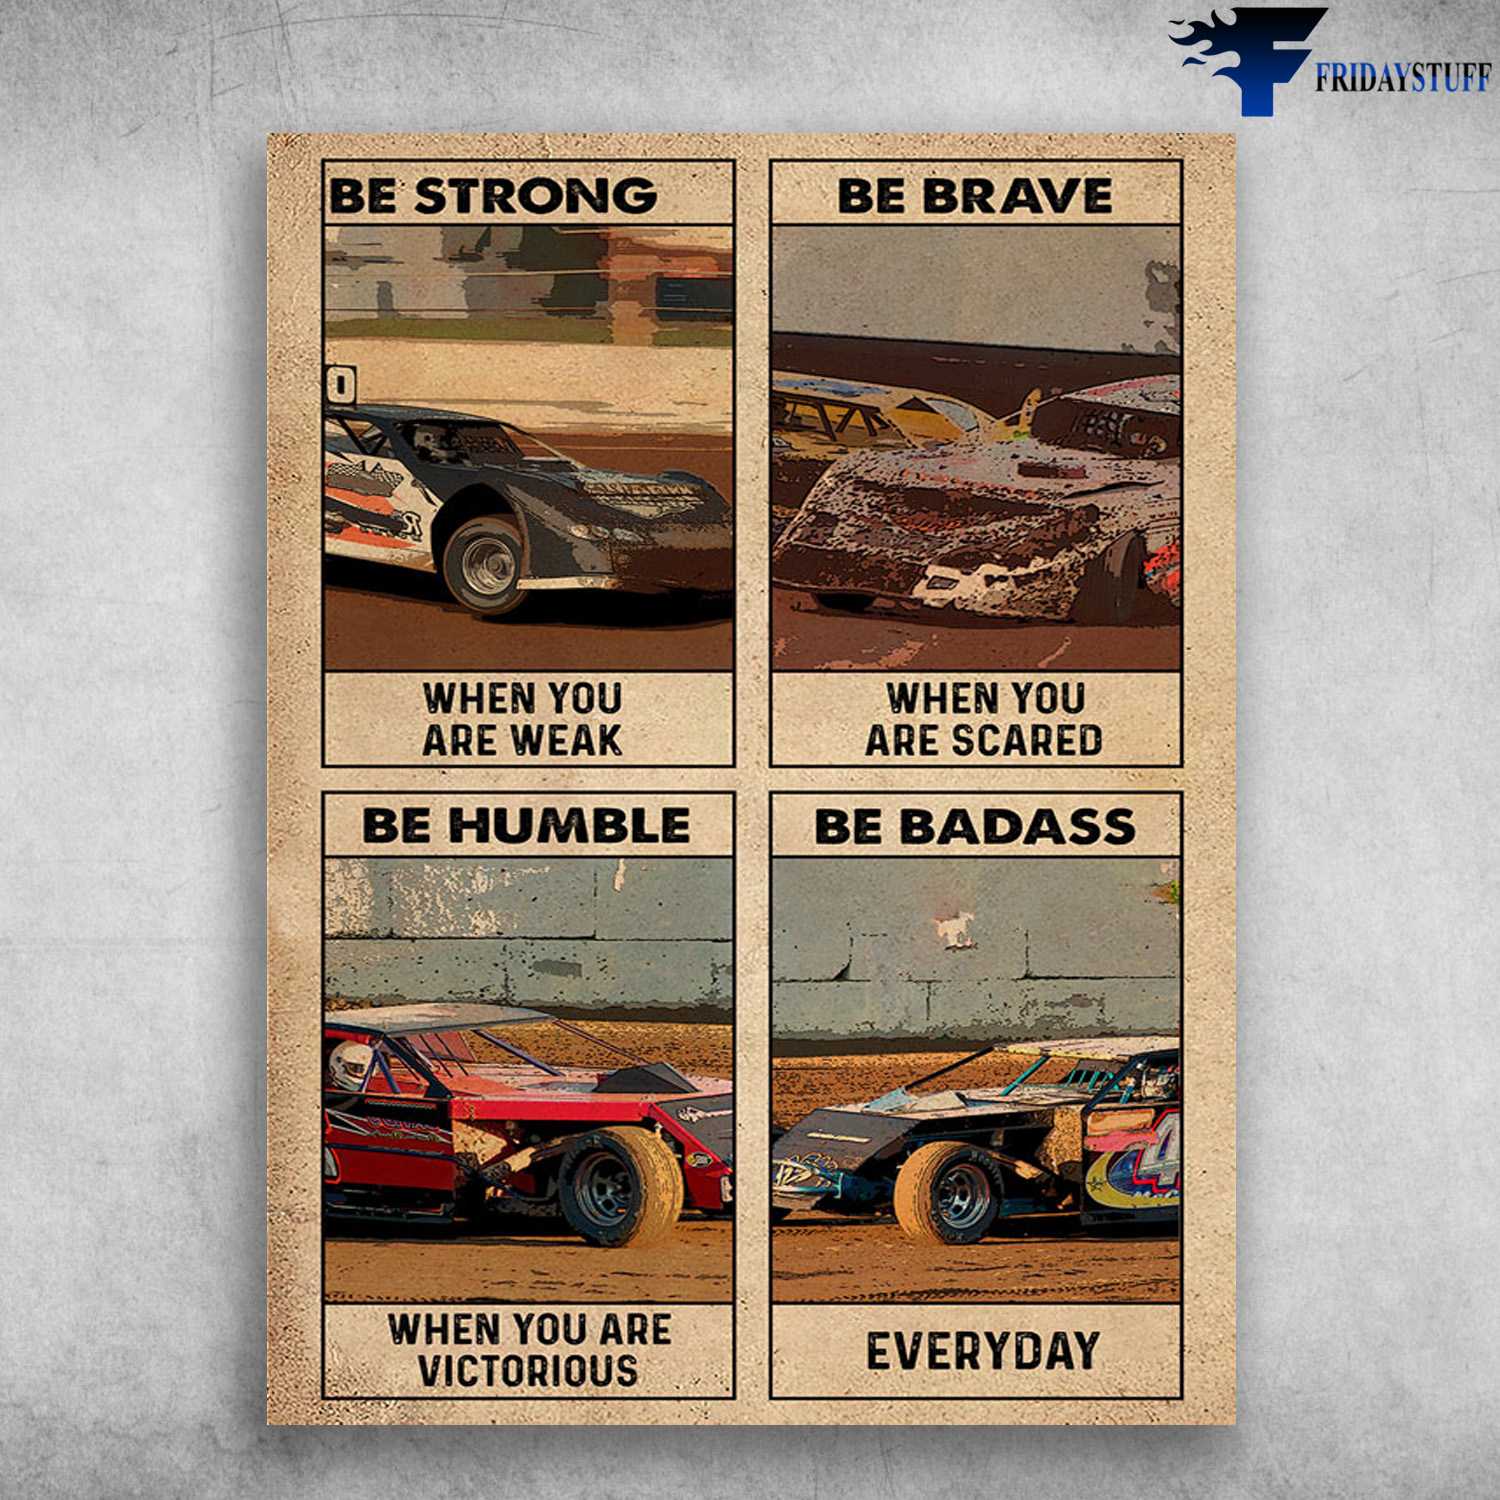 Racing Car, Speed Lover - Be Strong When You Are Weak, Be Brave When You Are Scared, Be Humble When You Are Victorious, Be Badass Everyday